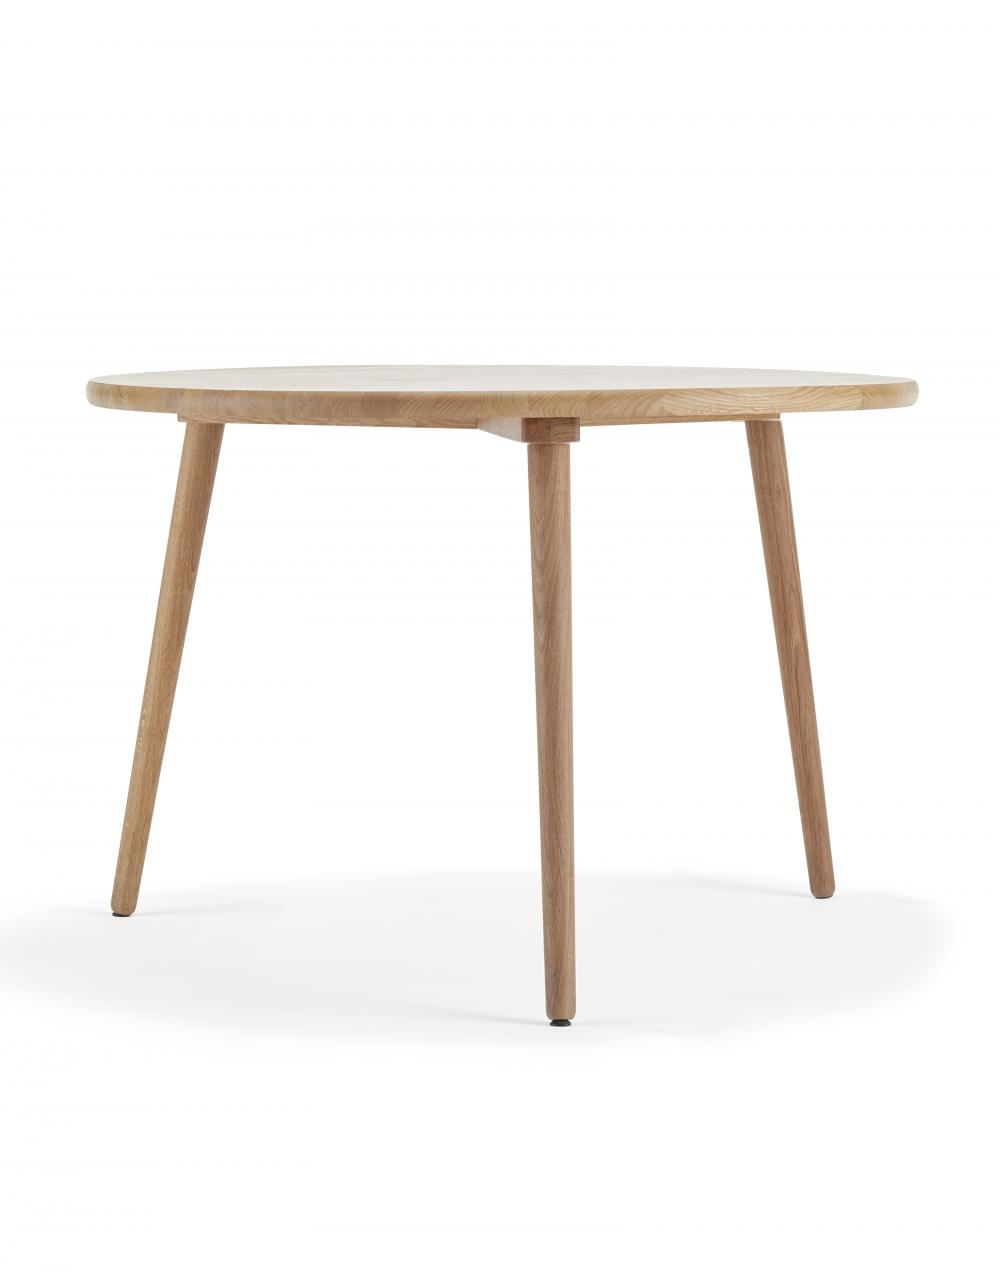 Stolab Miss Tailor Table Round Birch Light Wood Designer Furniture From Holloways Of Ludlow